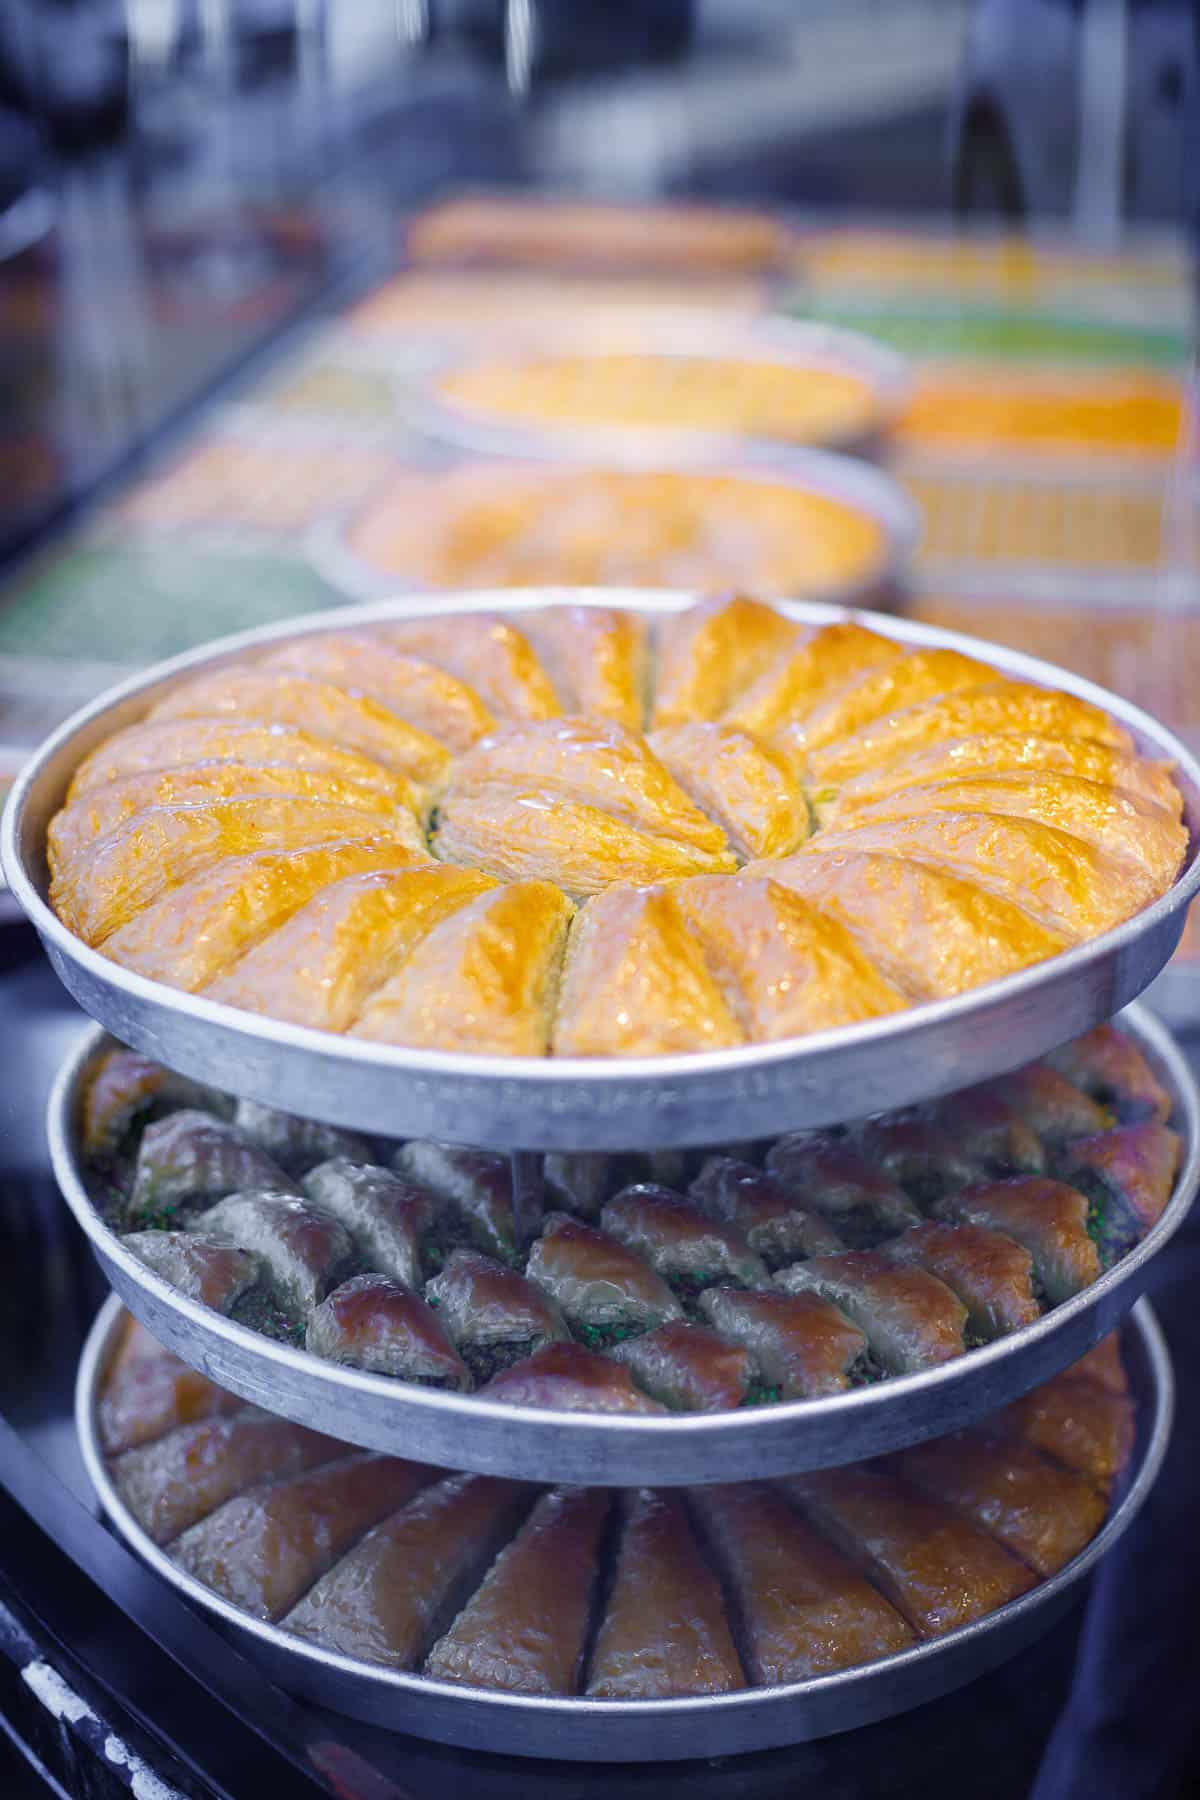 Trays of havuc dilimi and other types of baklava at a bakery in Istanbul.